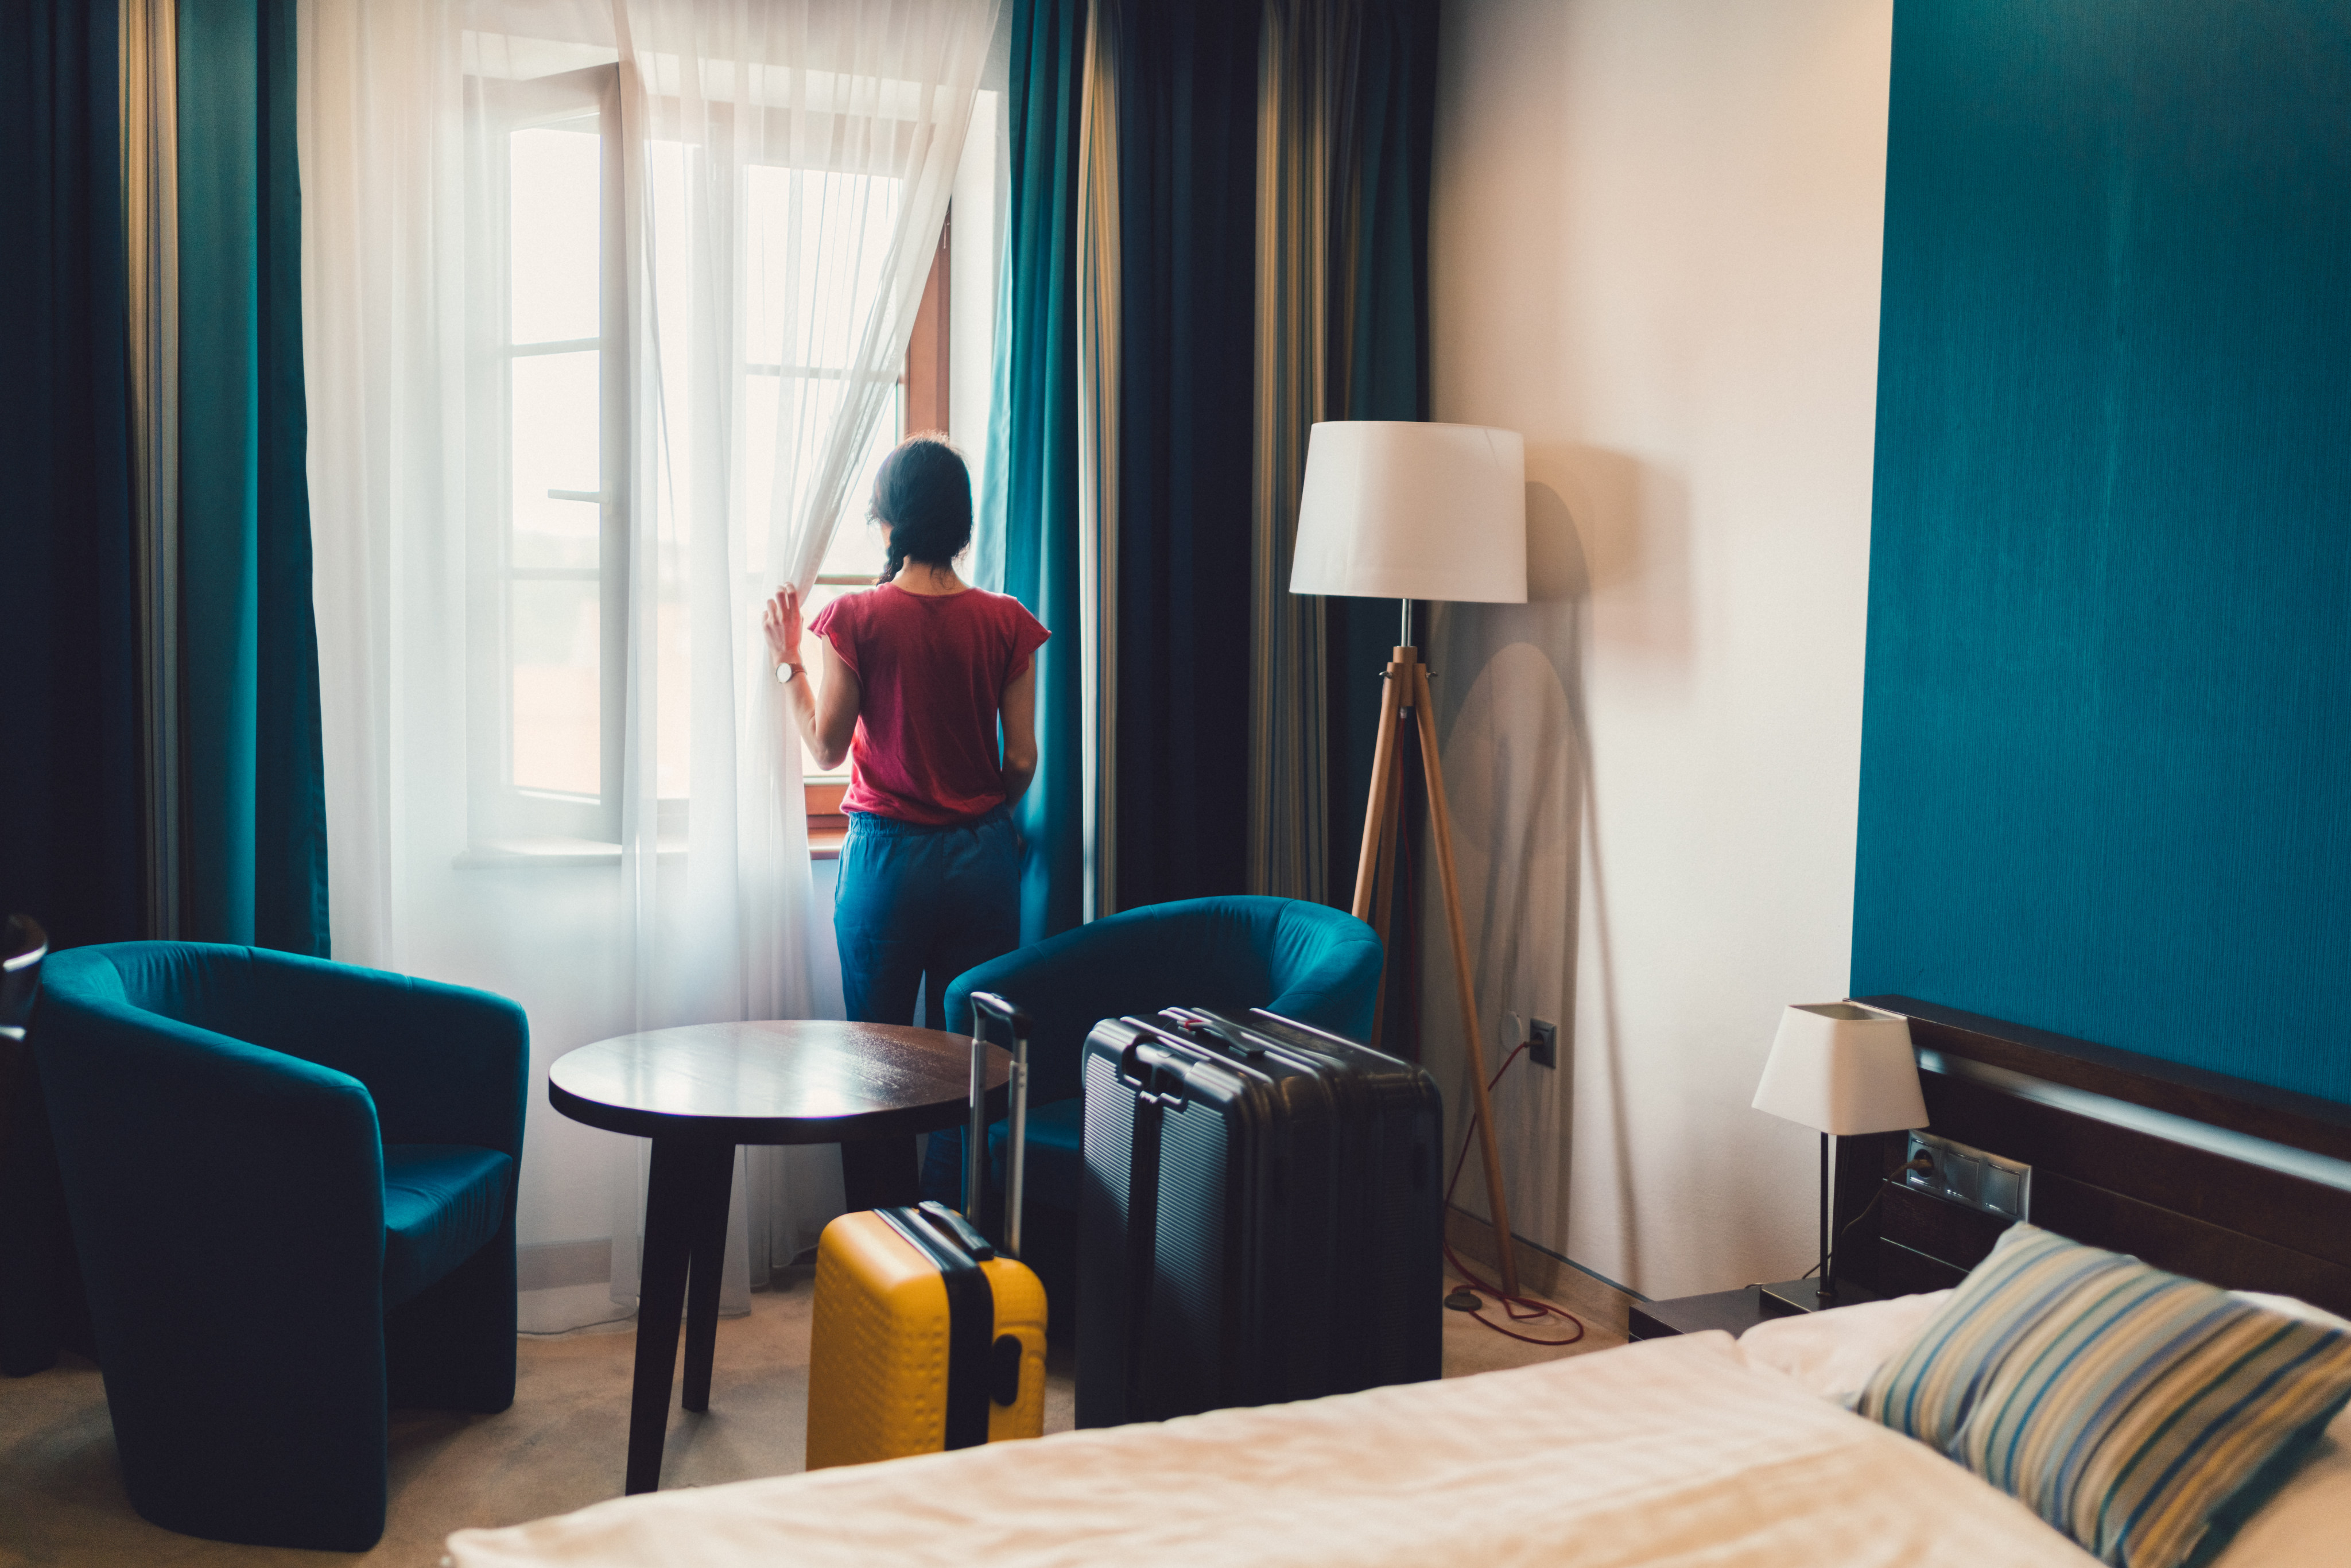 Travellers choose accommodation that suits their needs and budgets,. Some will always book the most luxurious hotel room or Airbnb they can afford, while others prefer to spend their money on experiences. Photo: Getty Images